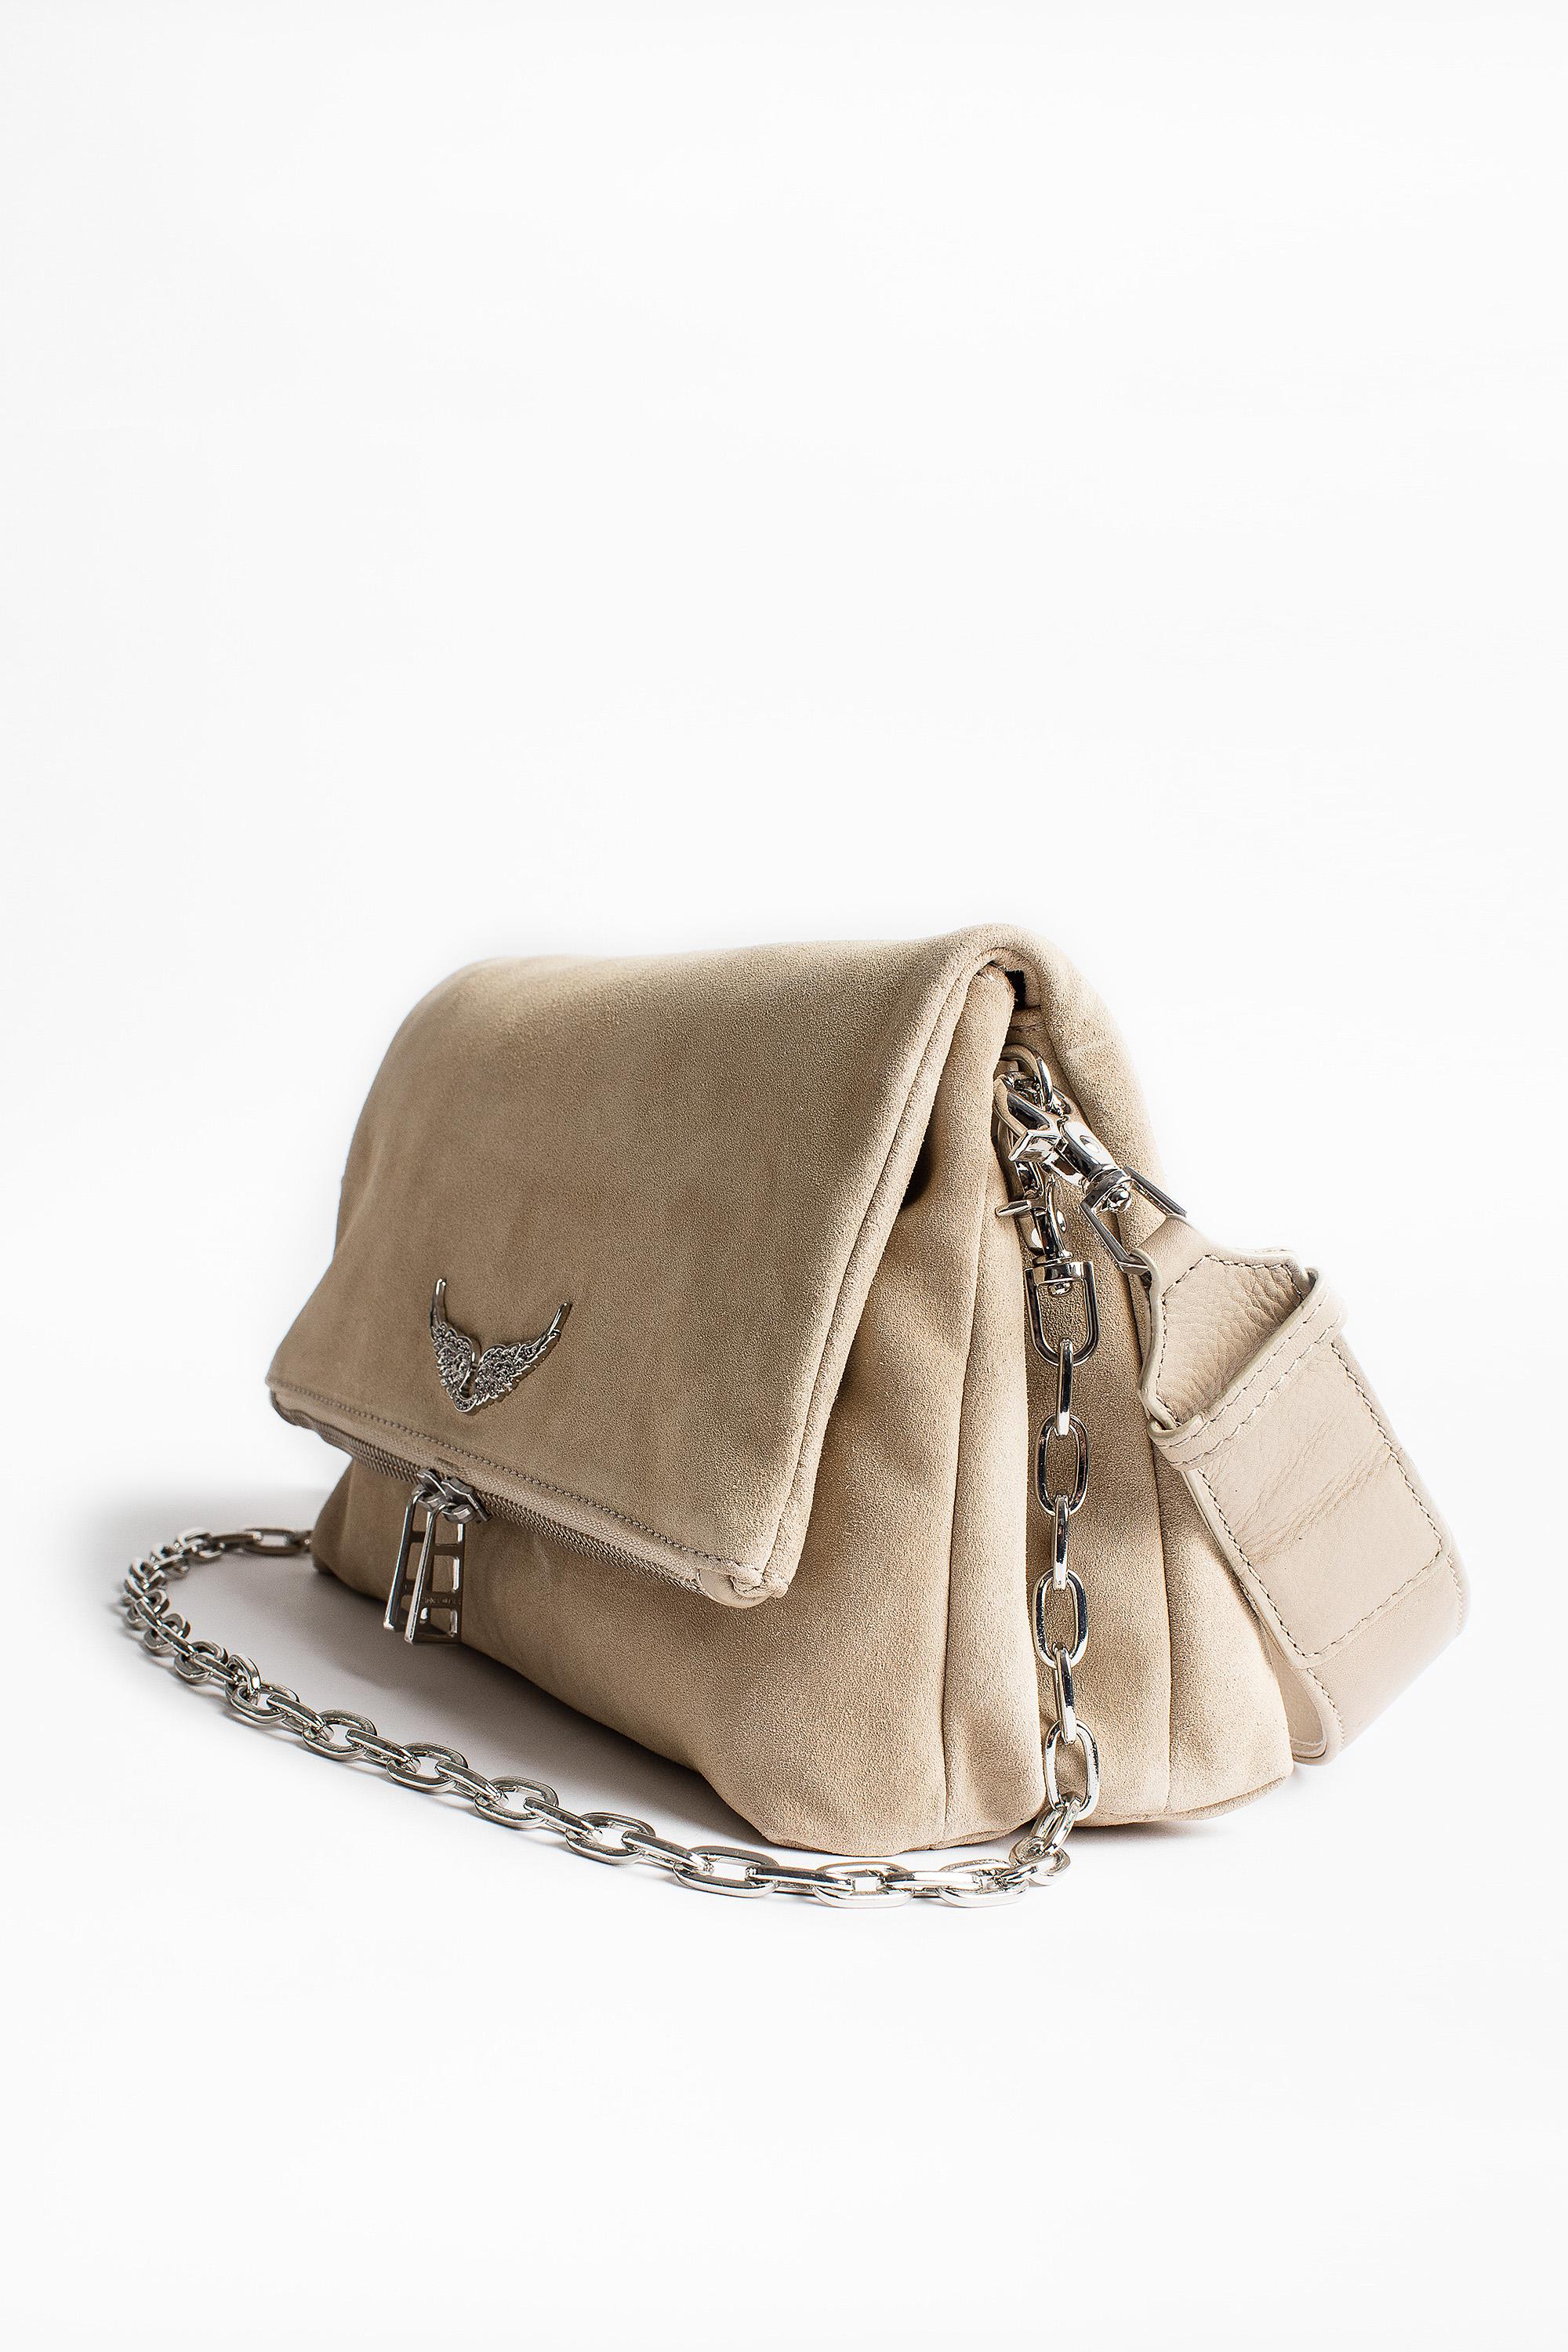 Zadig & Voltaire Rocky Suede Bag in Natural | Lyst